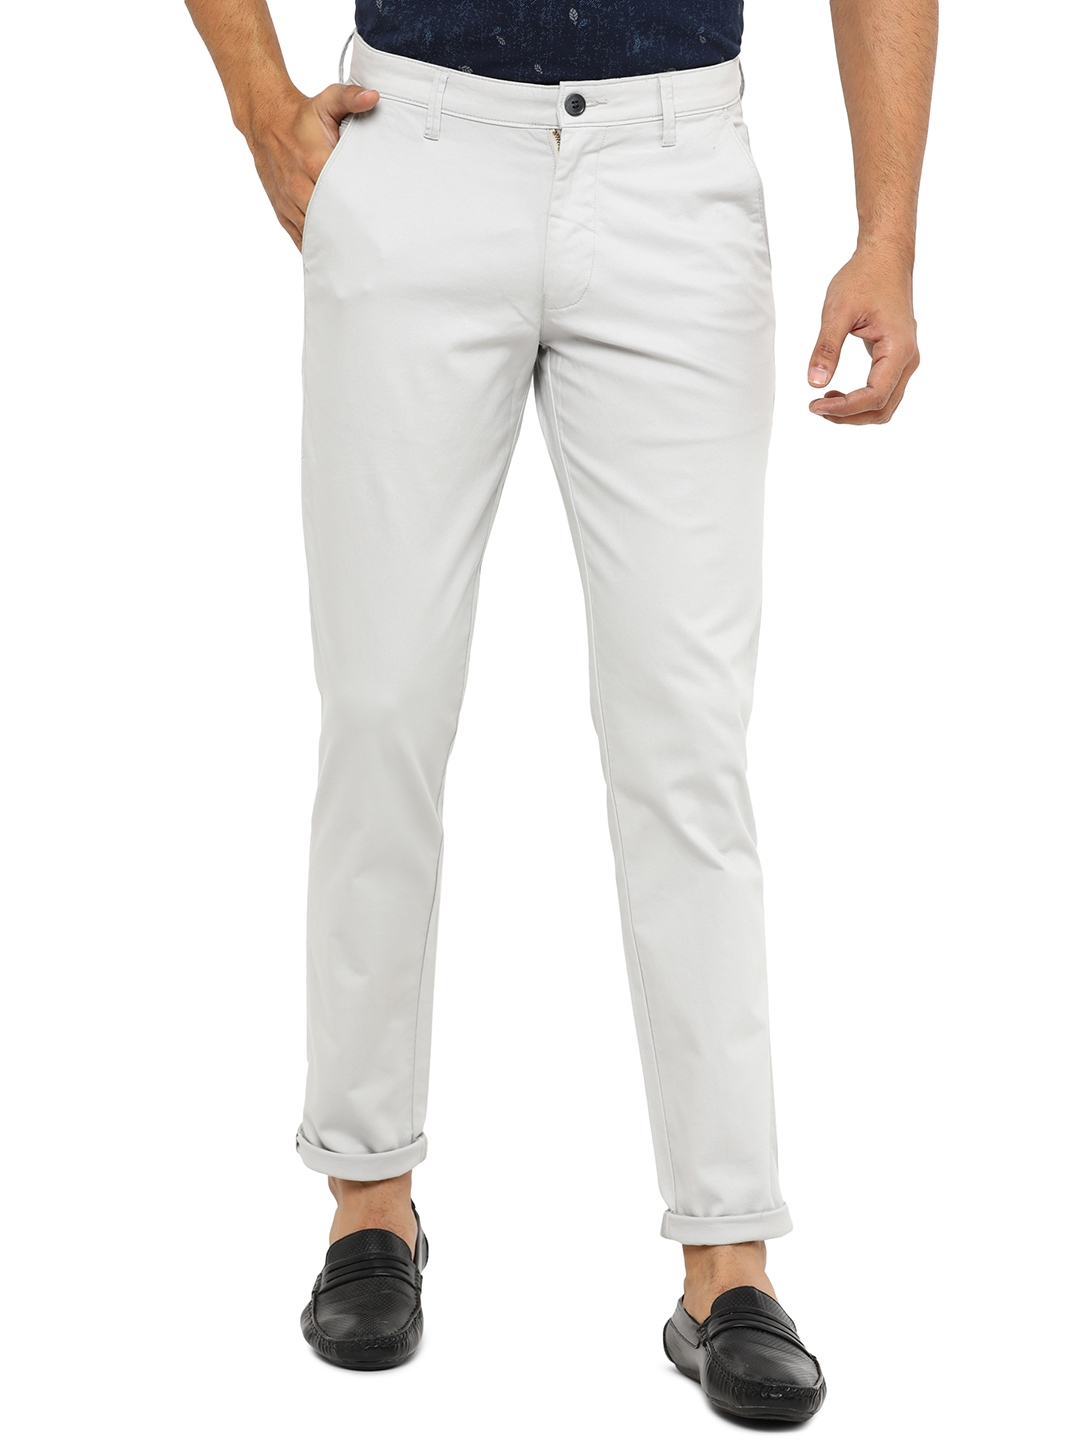 Greenfibre | Light Grey Solid Slim Fit Casual Trouser | Greenfibre